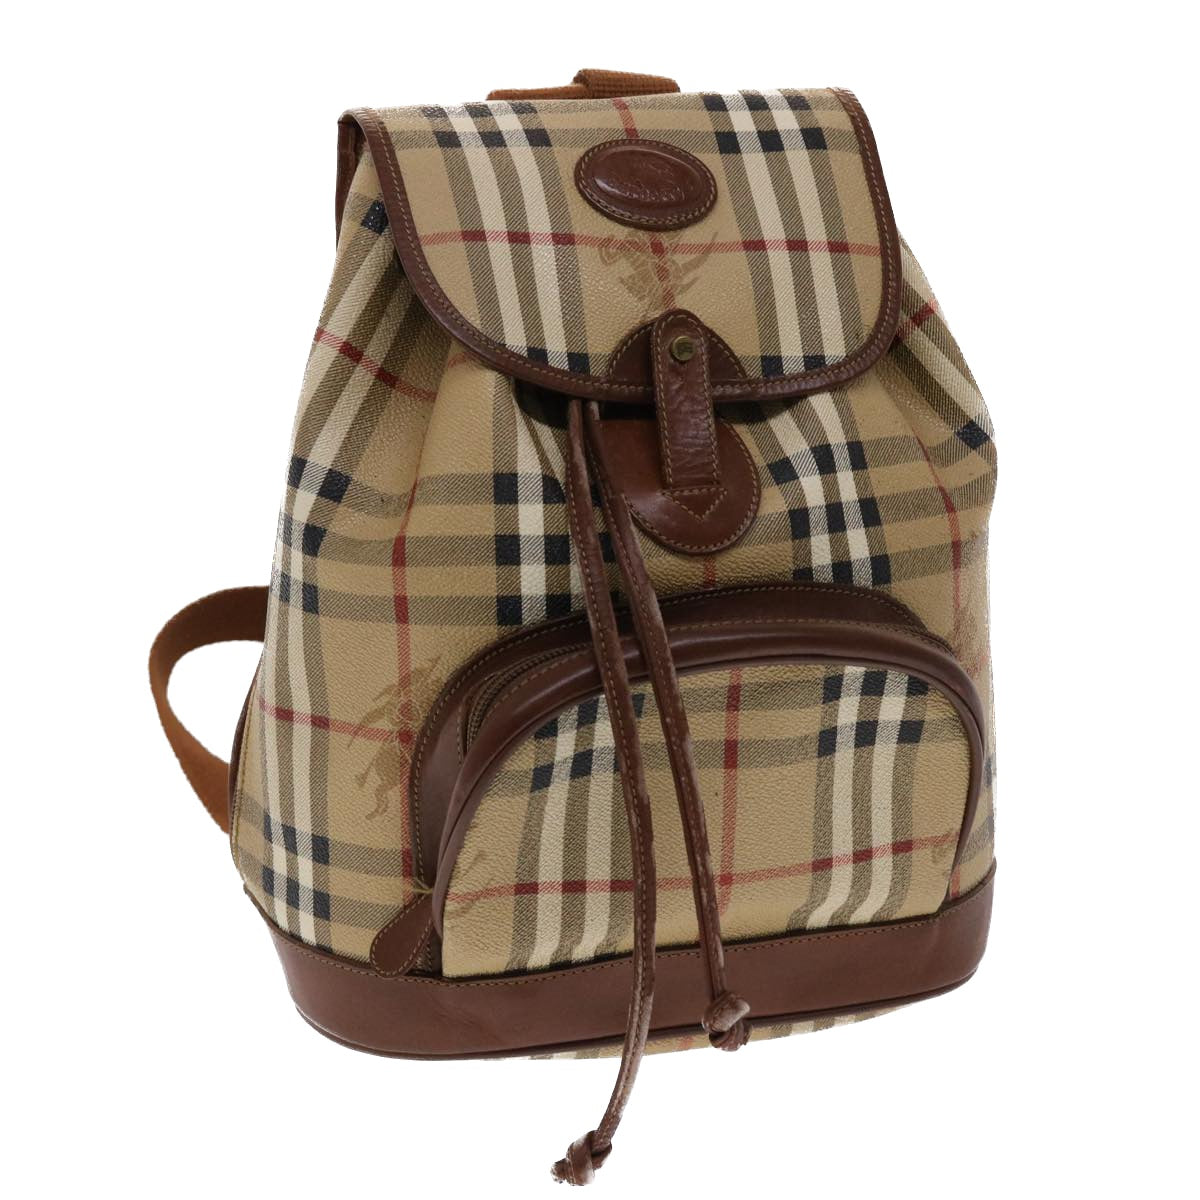 Burberrys Nova Check Backpack PVC Leather Beige Brown Auth 48171